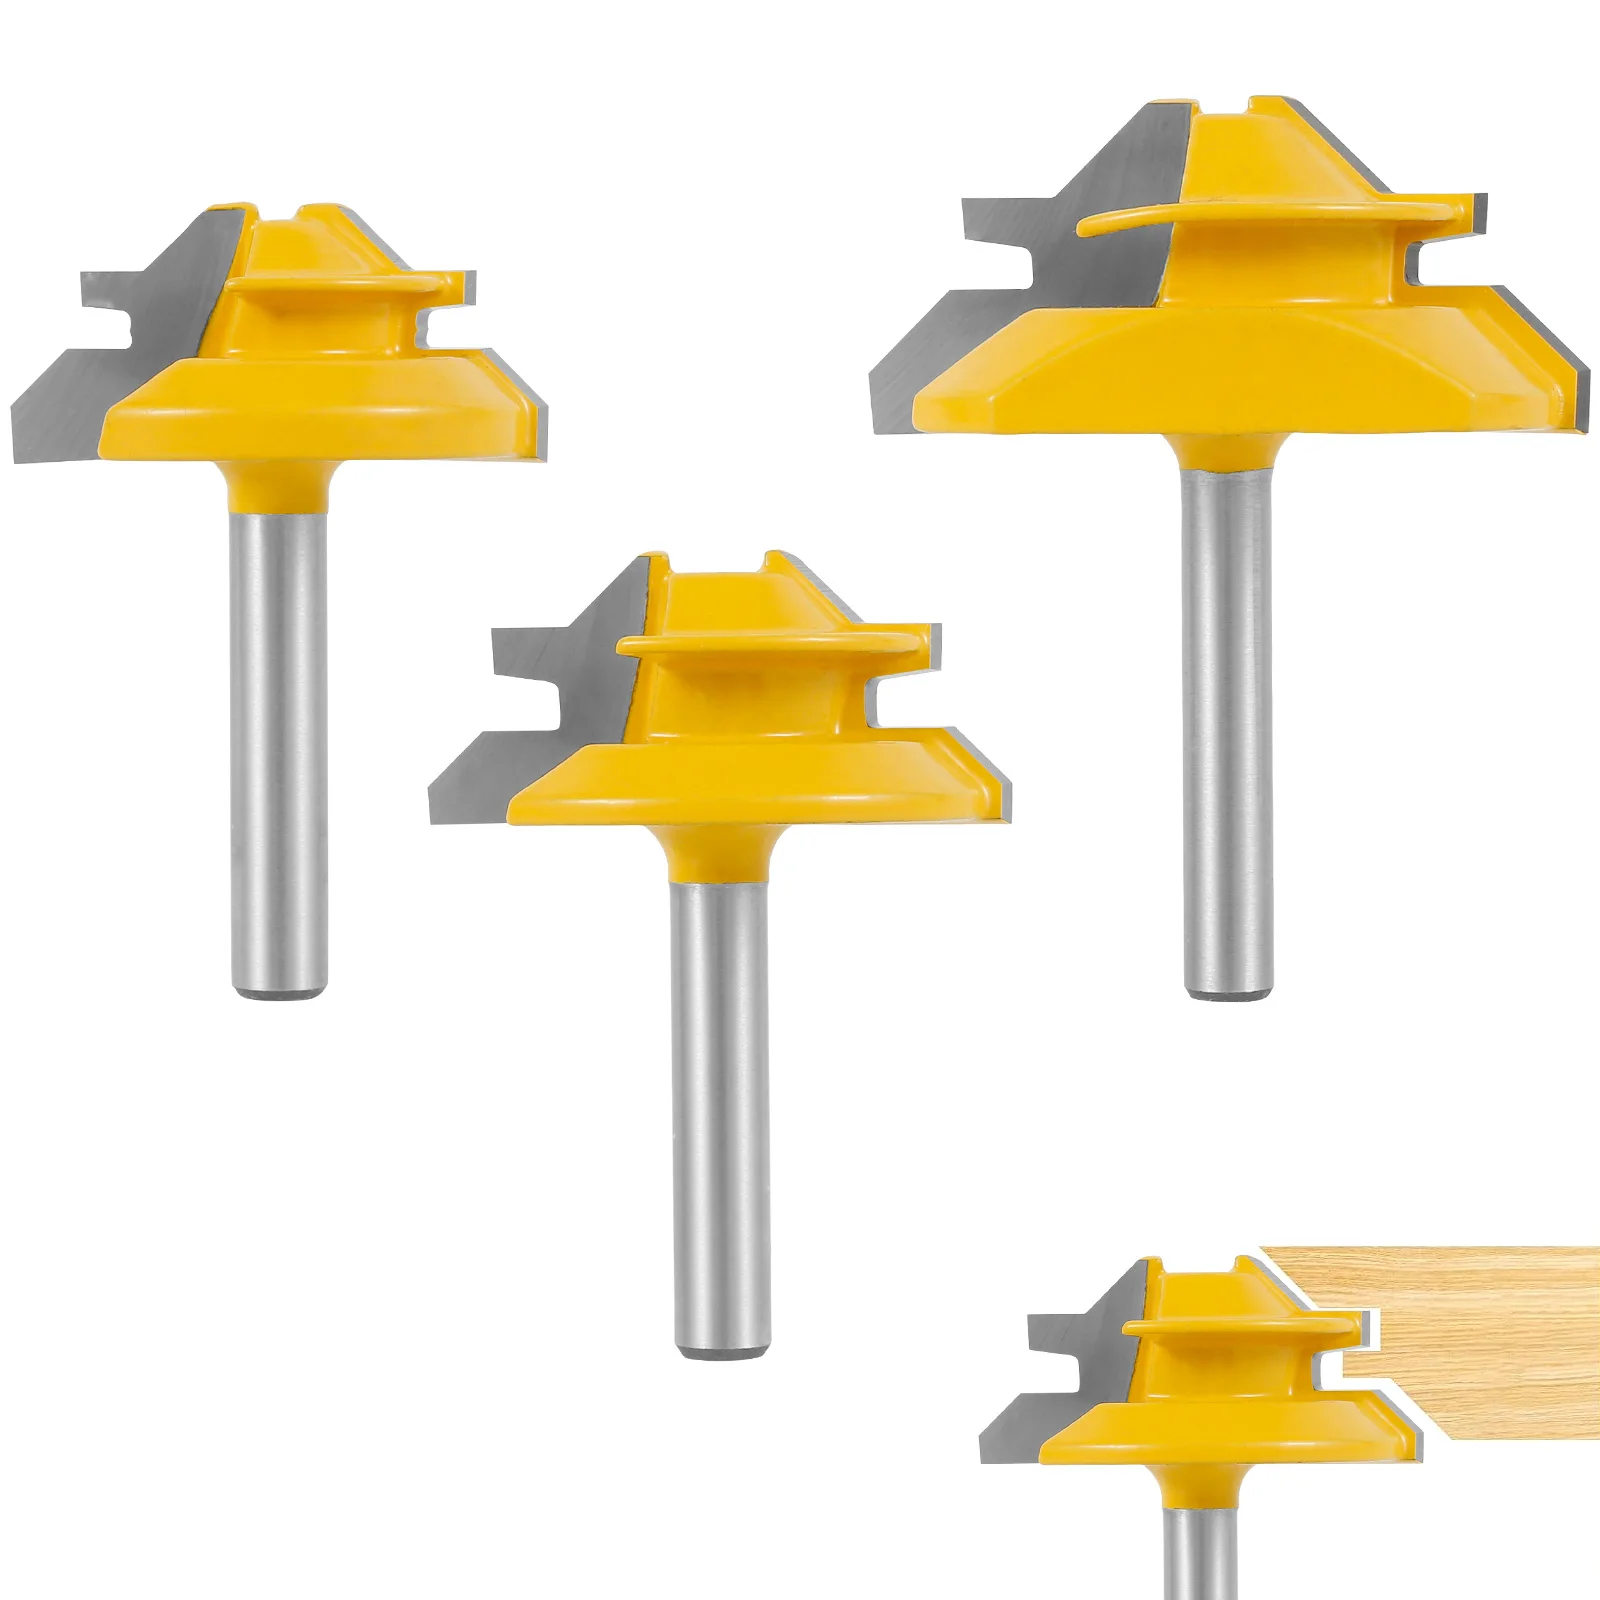 

New 3Pcs 45° Lock Miter Router Bit Set Carbide Tipped Joint Router Bit Kit with 1/4inch Shank Woodworking Milling Cutter Tool